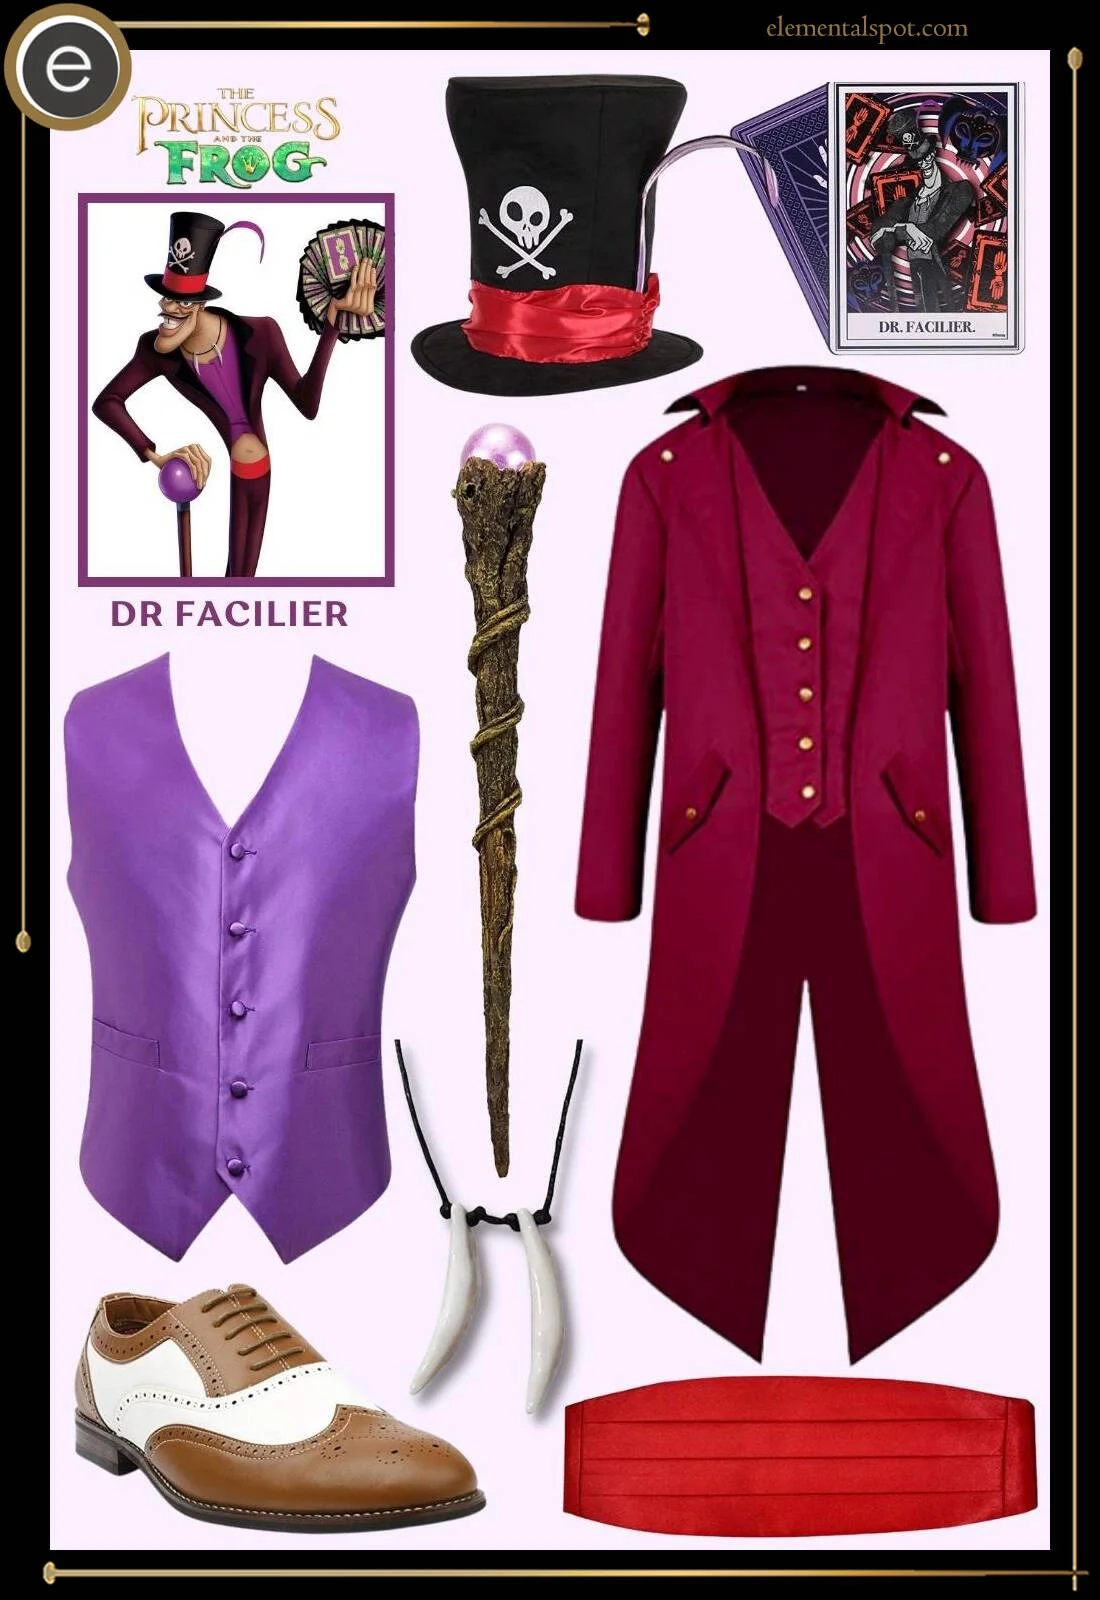 Dress Up Like Dr Facilier from The Princess and The Frog - Elemental Spot